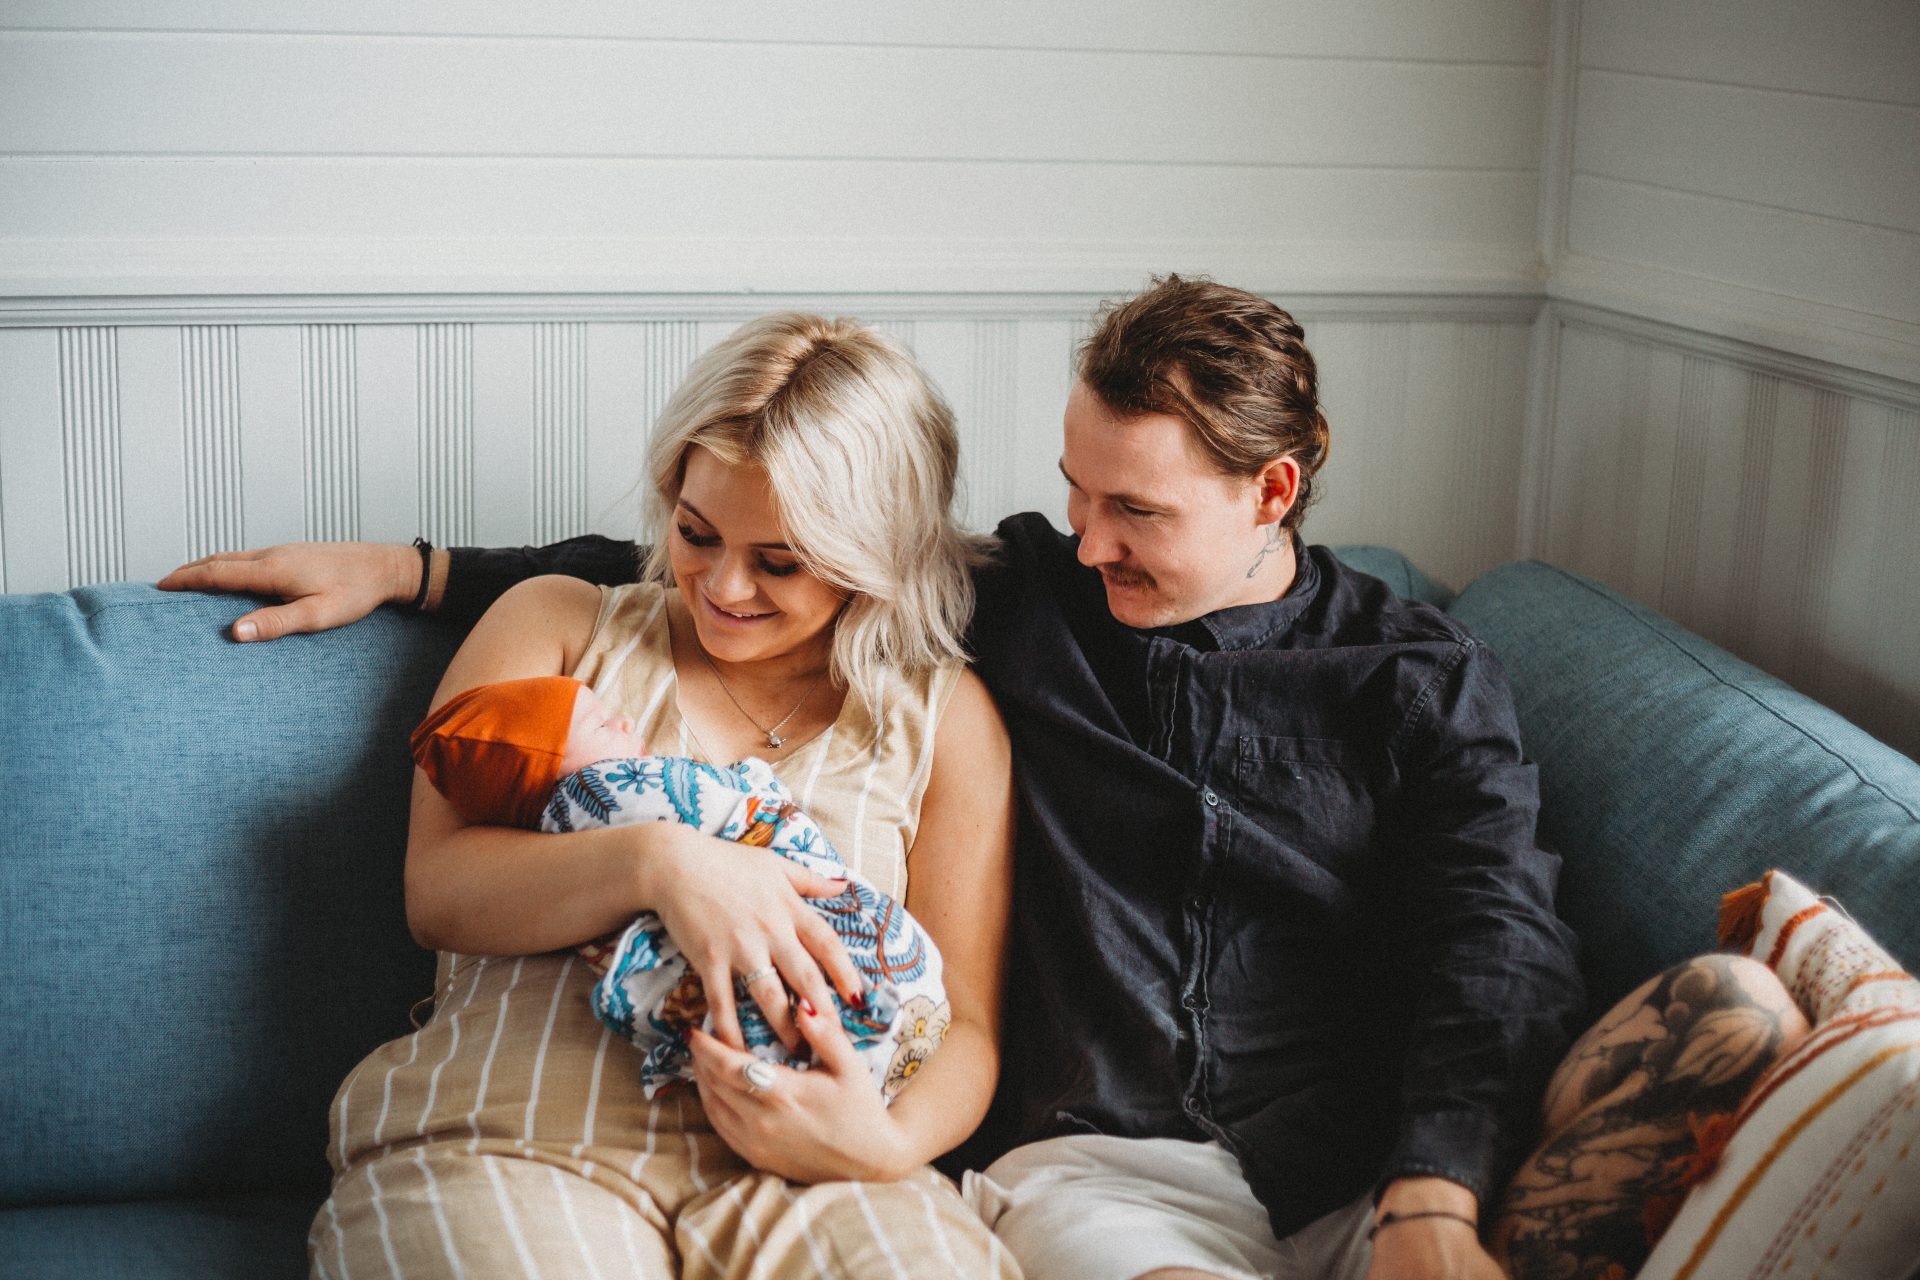 Young woman on couch holding newborn son, with her partner next to her, with his arm around her, both looking and smiling at baby